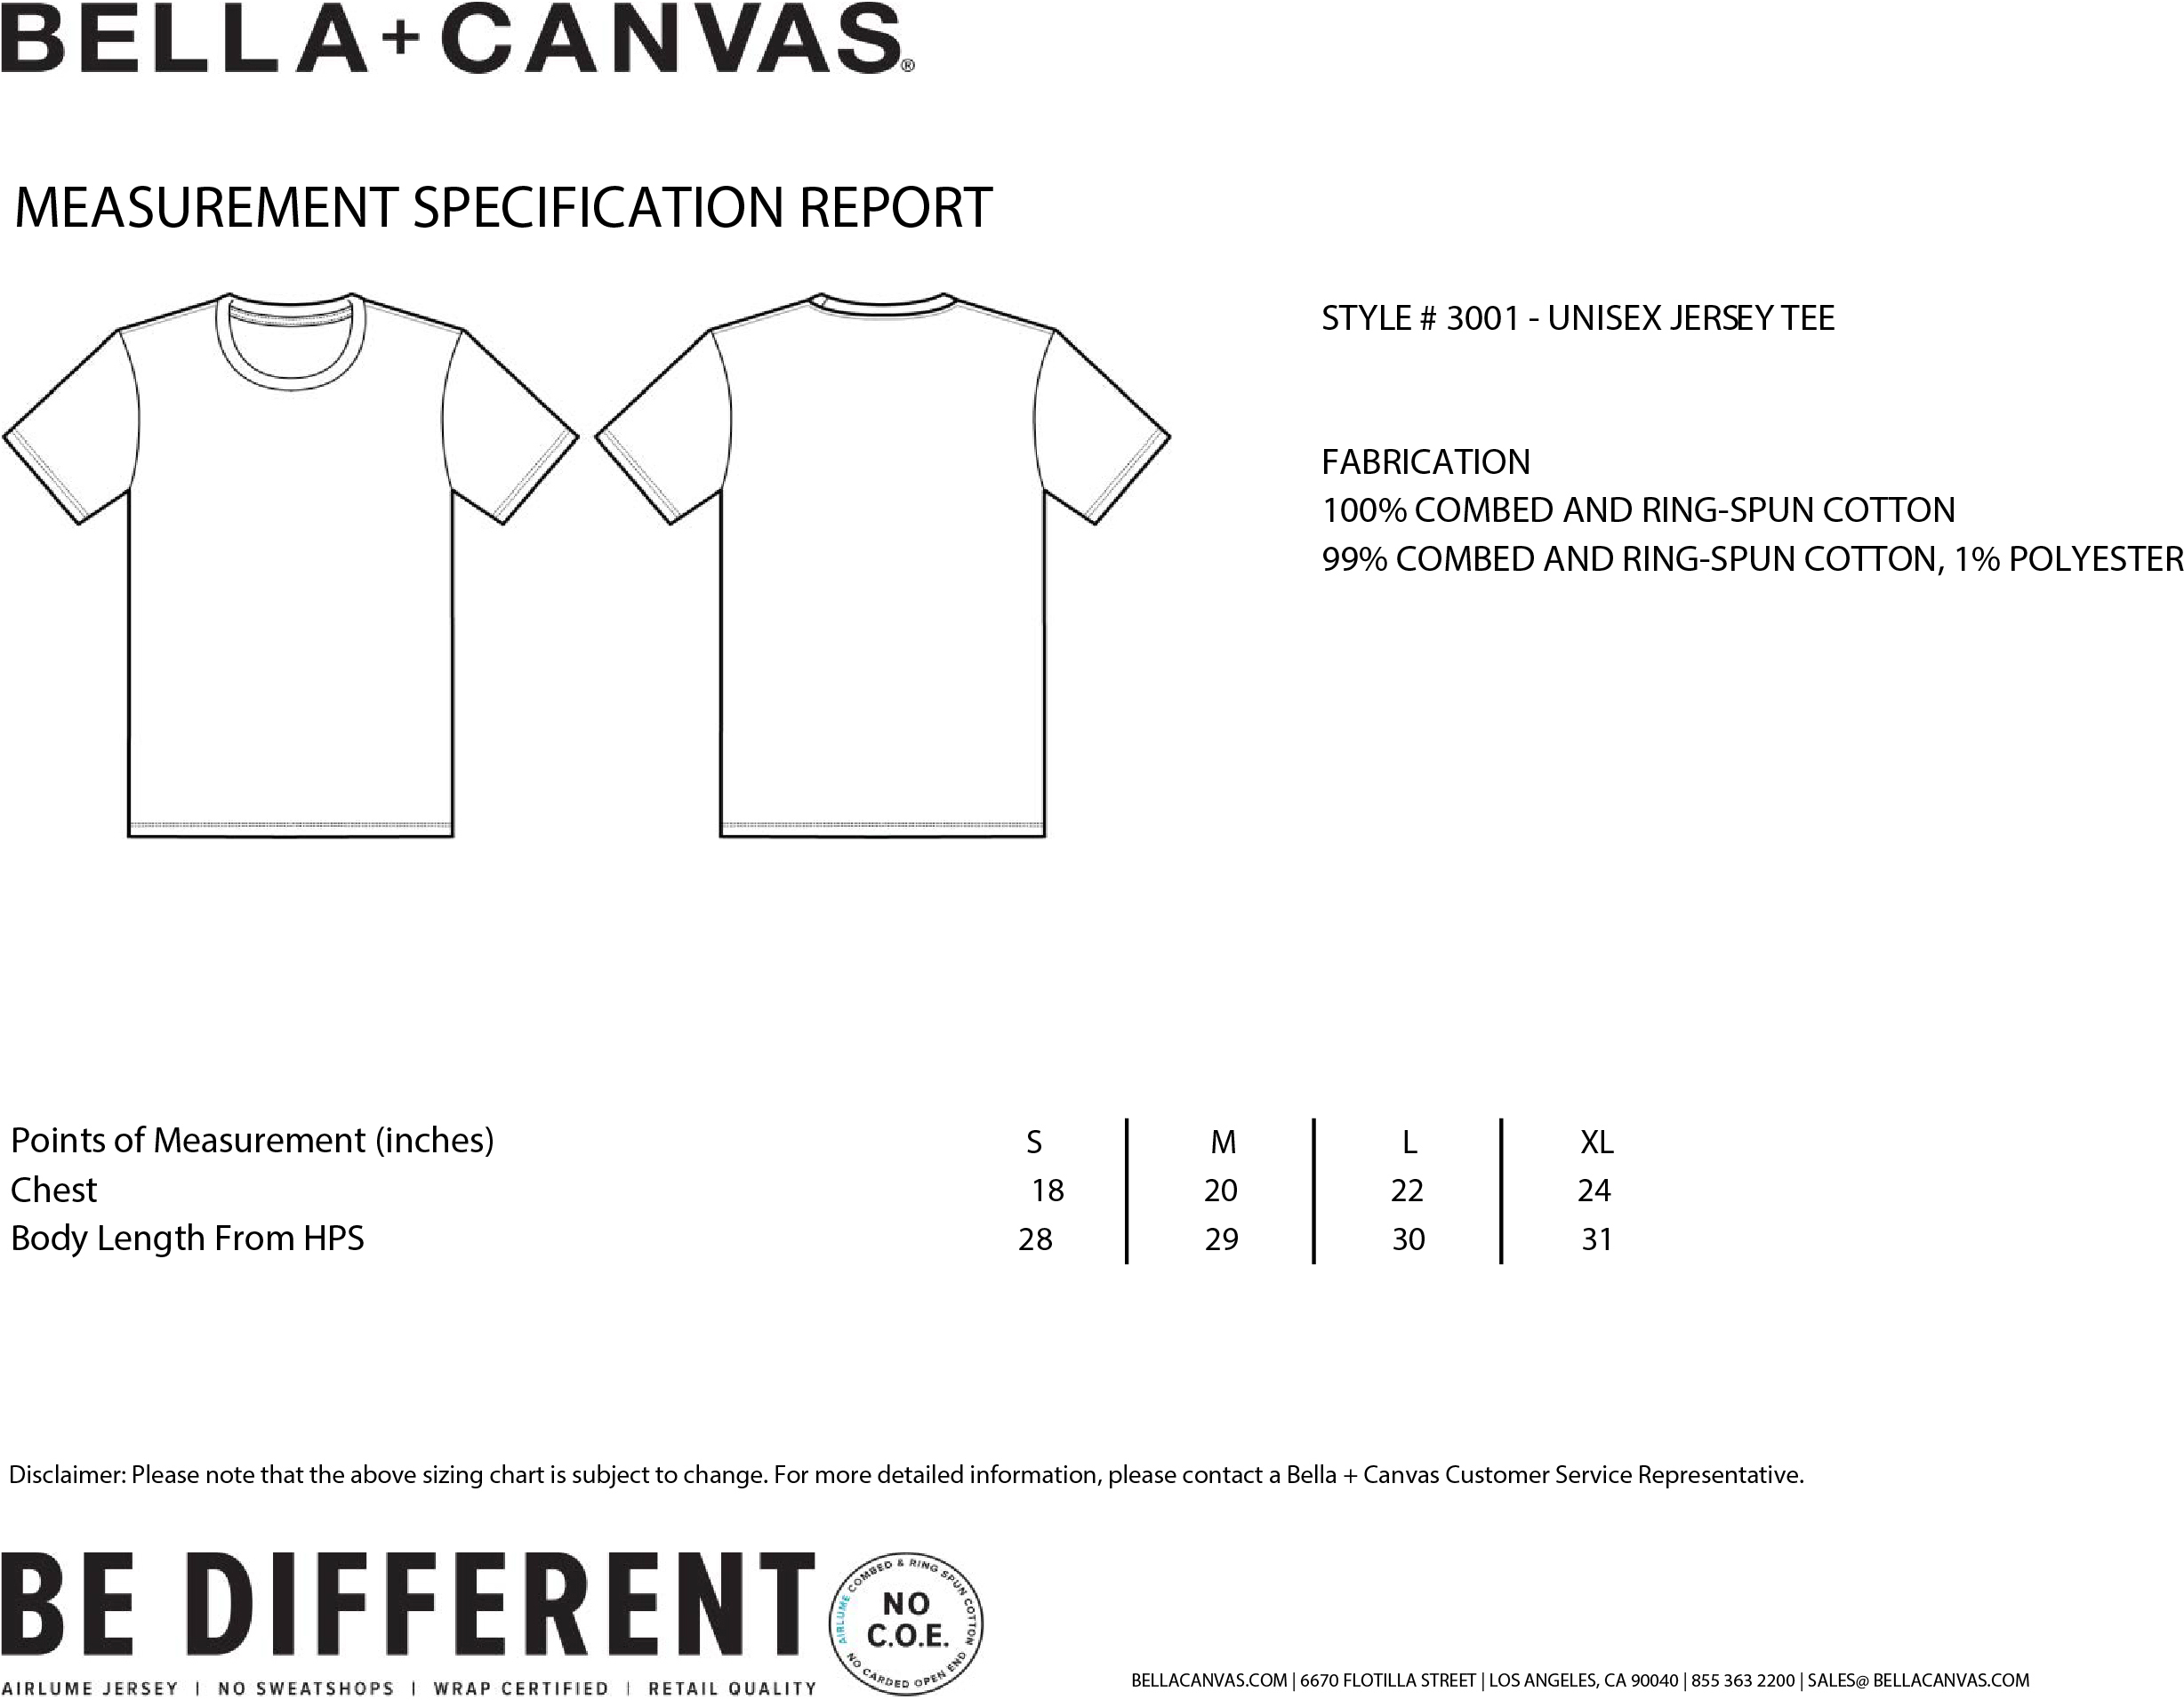 Bella Canvas t-shirt sizing guide